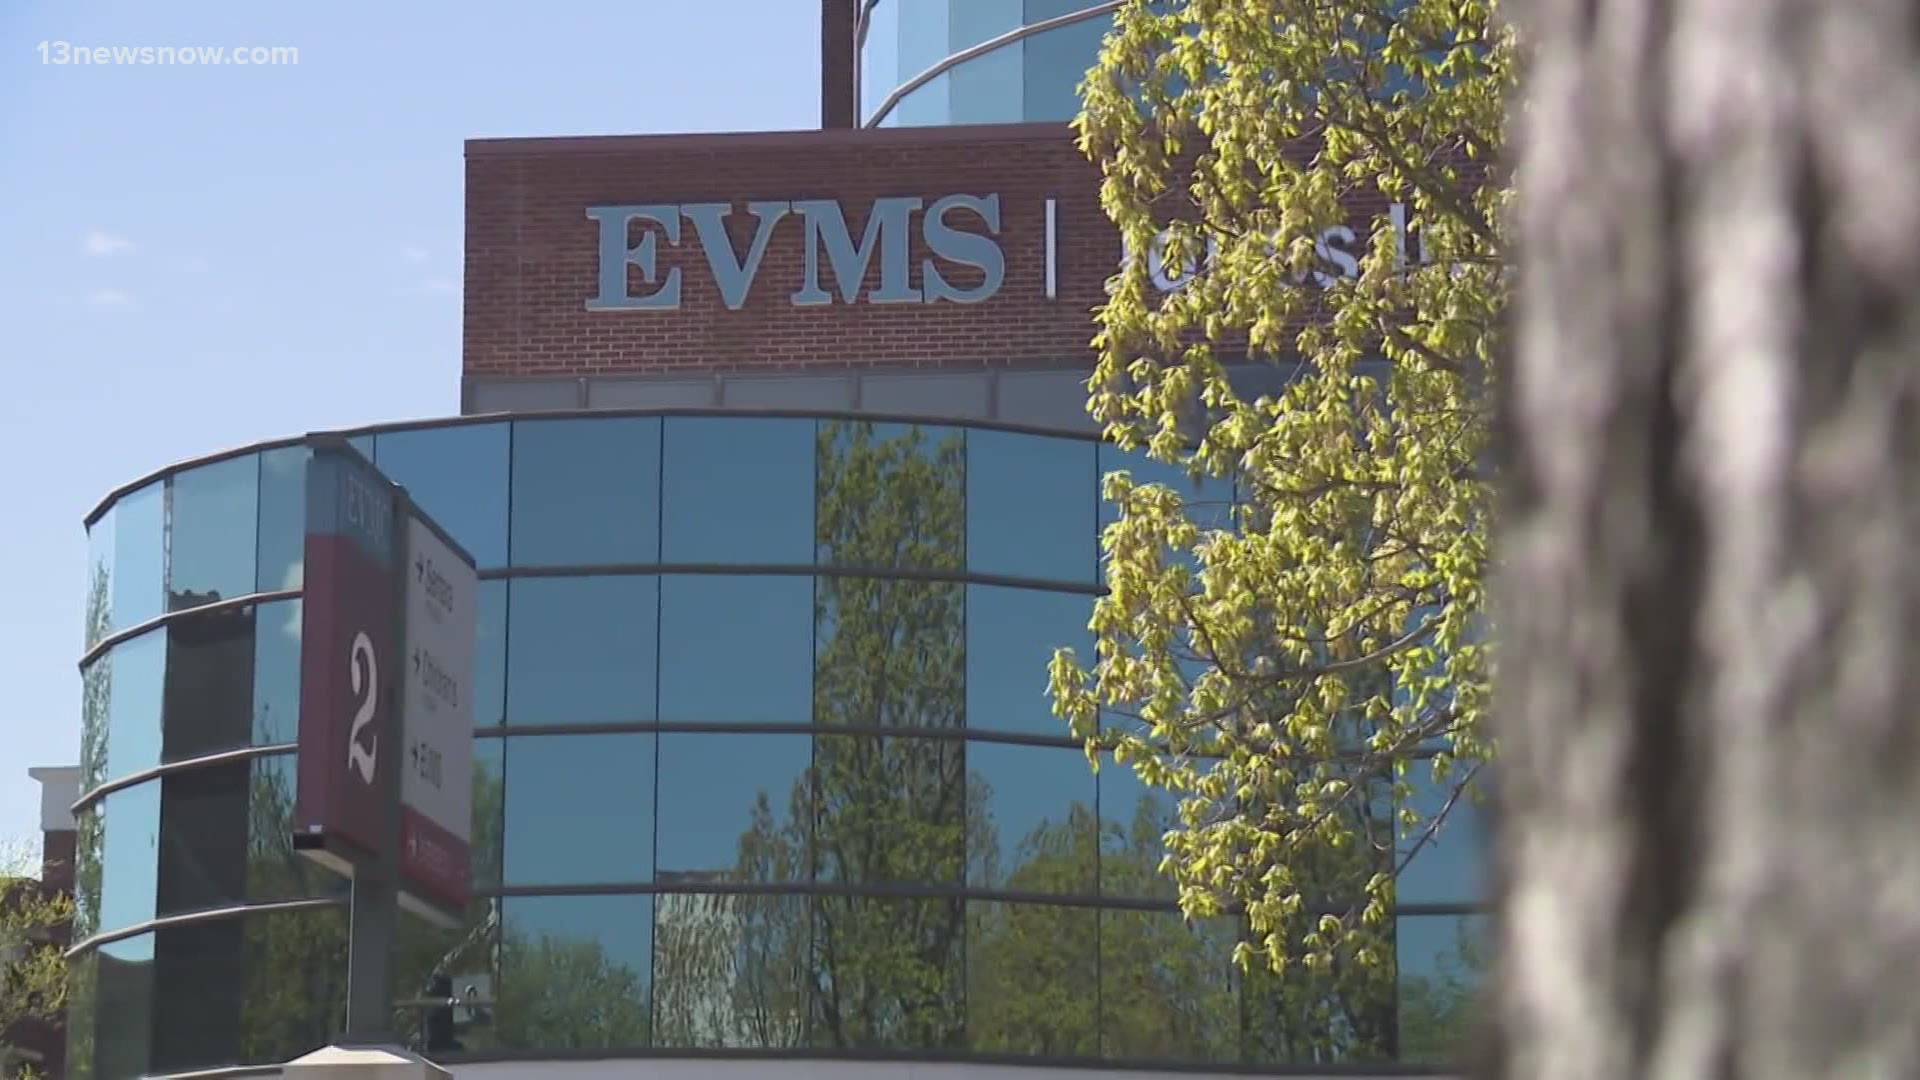 A medical professional with the EVMS said the second dose of the COVID-19 vaccine has more side effects that many people under the age of 55 could experience.